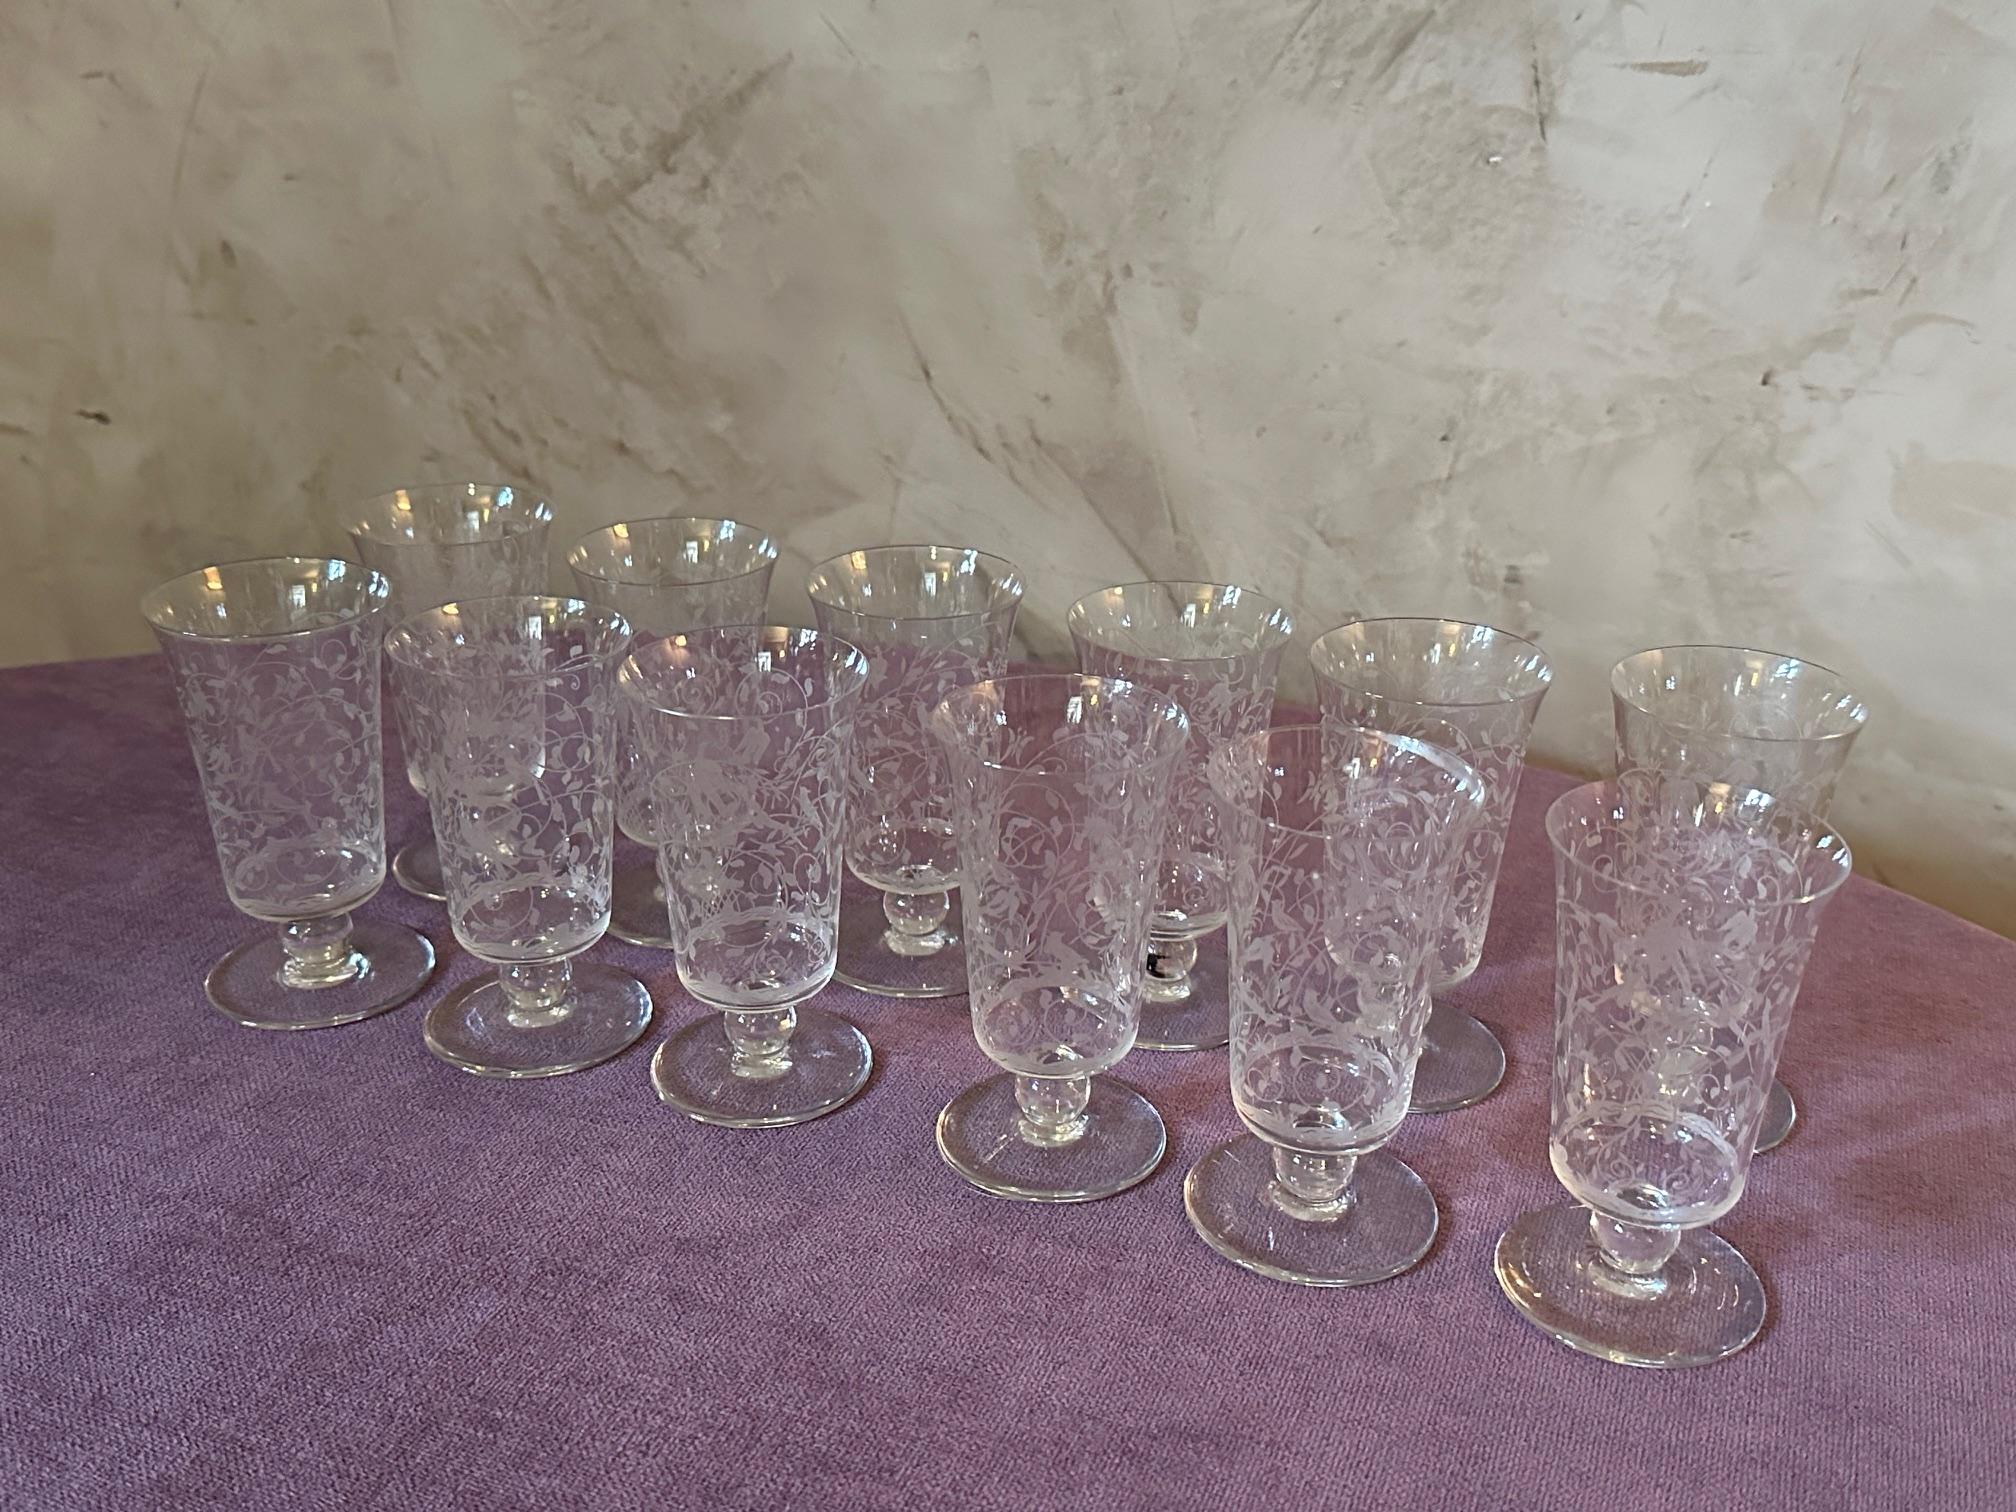 20th century French Set of Crystal Baccarat Glasses, Pitcher and Decanter For Sale 14